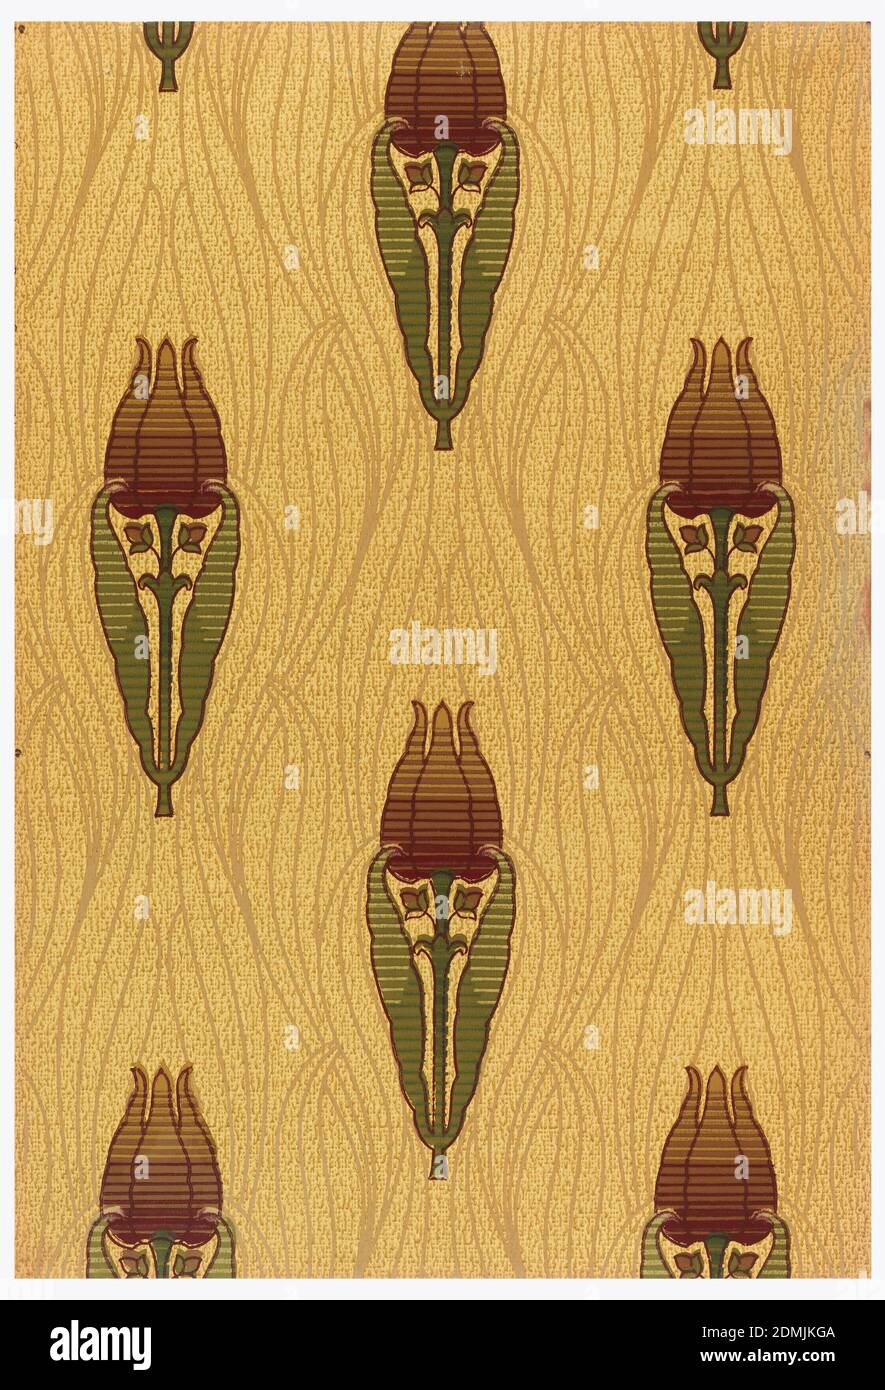 Sidewall - sample, Machine-printed on paper, Ground of light brown overlapping leaves with staggered stemmed tulips in shades of brown and leaves that curve inward in shades of green., USA, 1906–08, Wallcoverings, Sidewall - sample Stock Photo